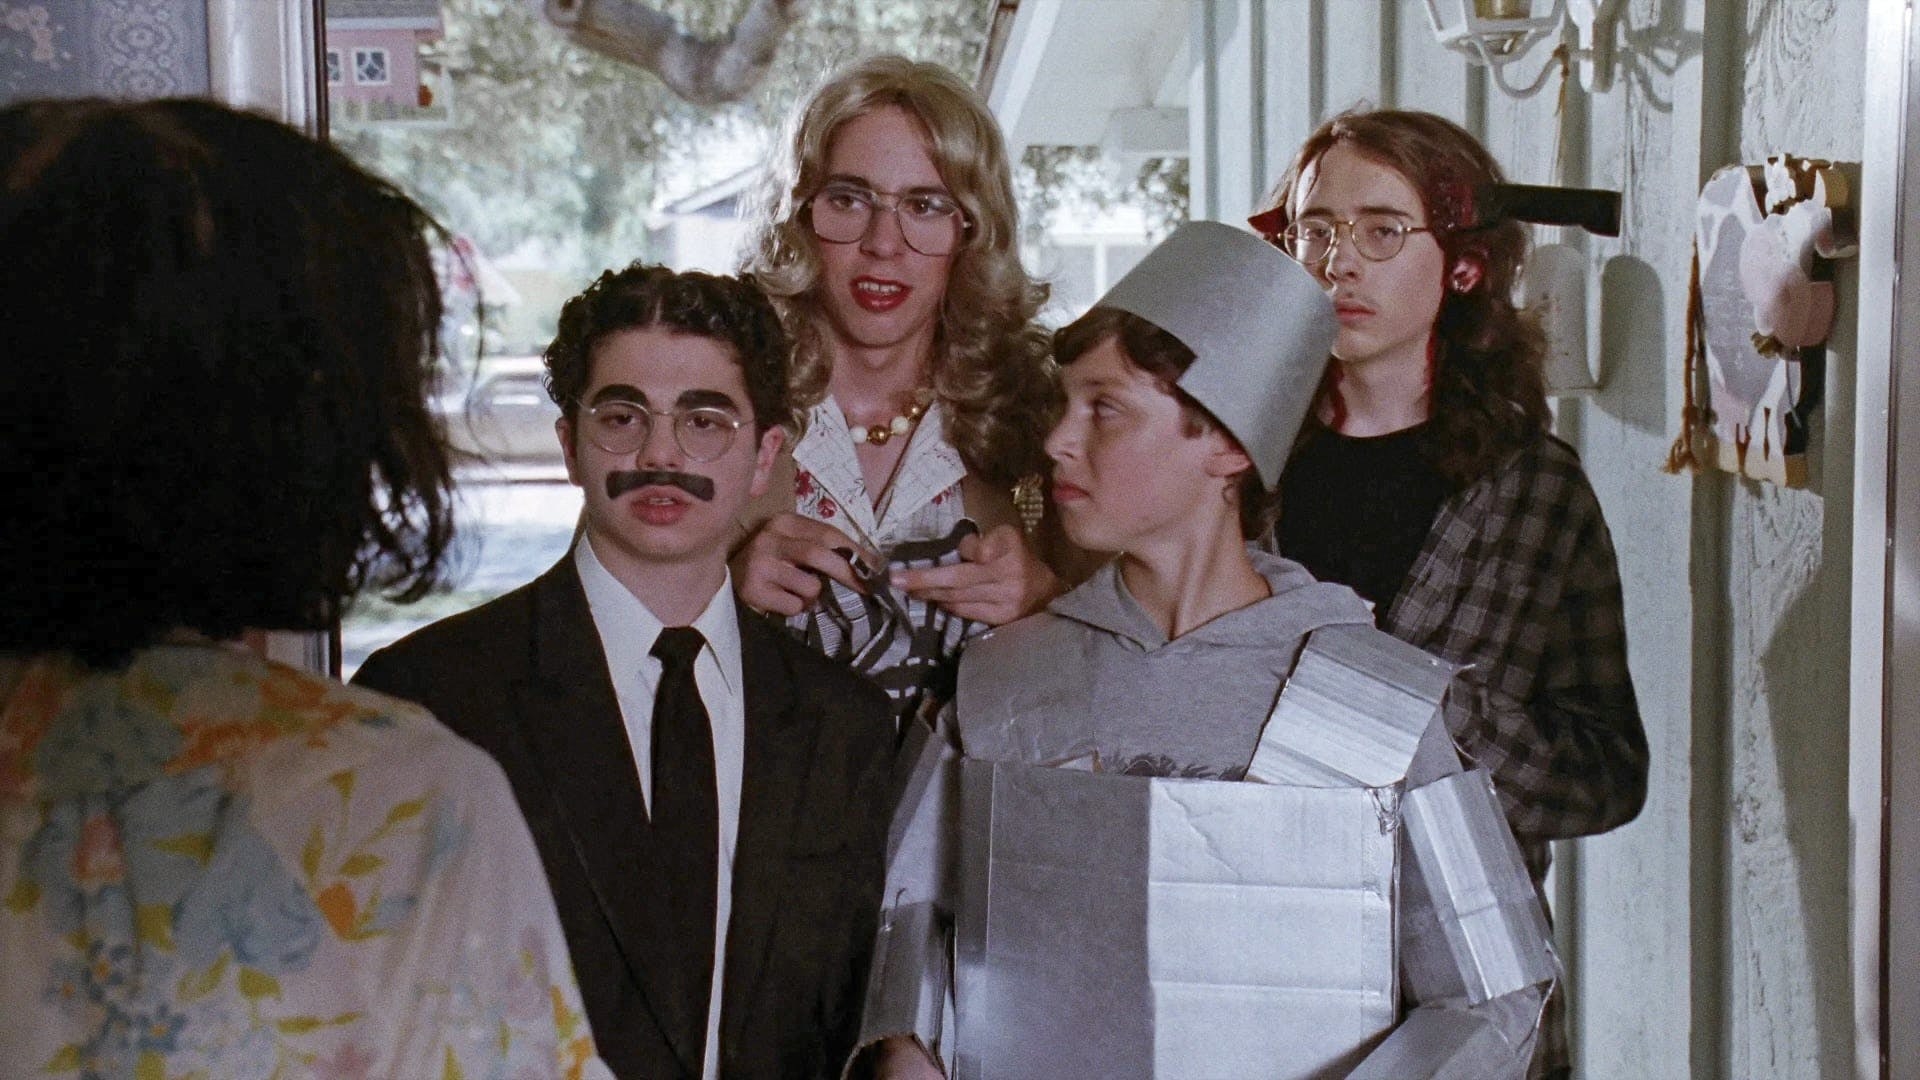 Sam Levine, Martin Starr, John Francis Daley, and Stephen Lea Sheppard trick-or-treating